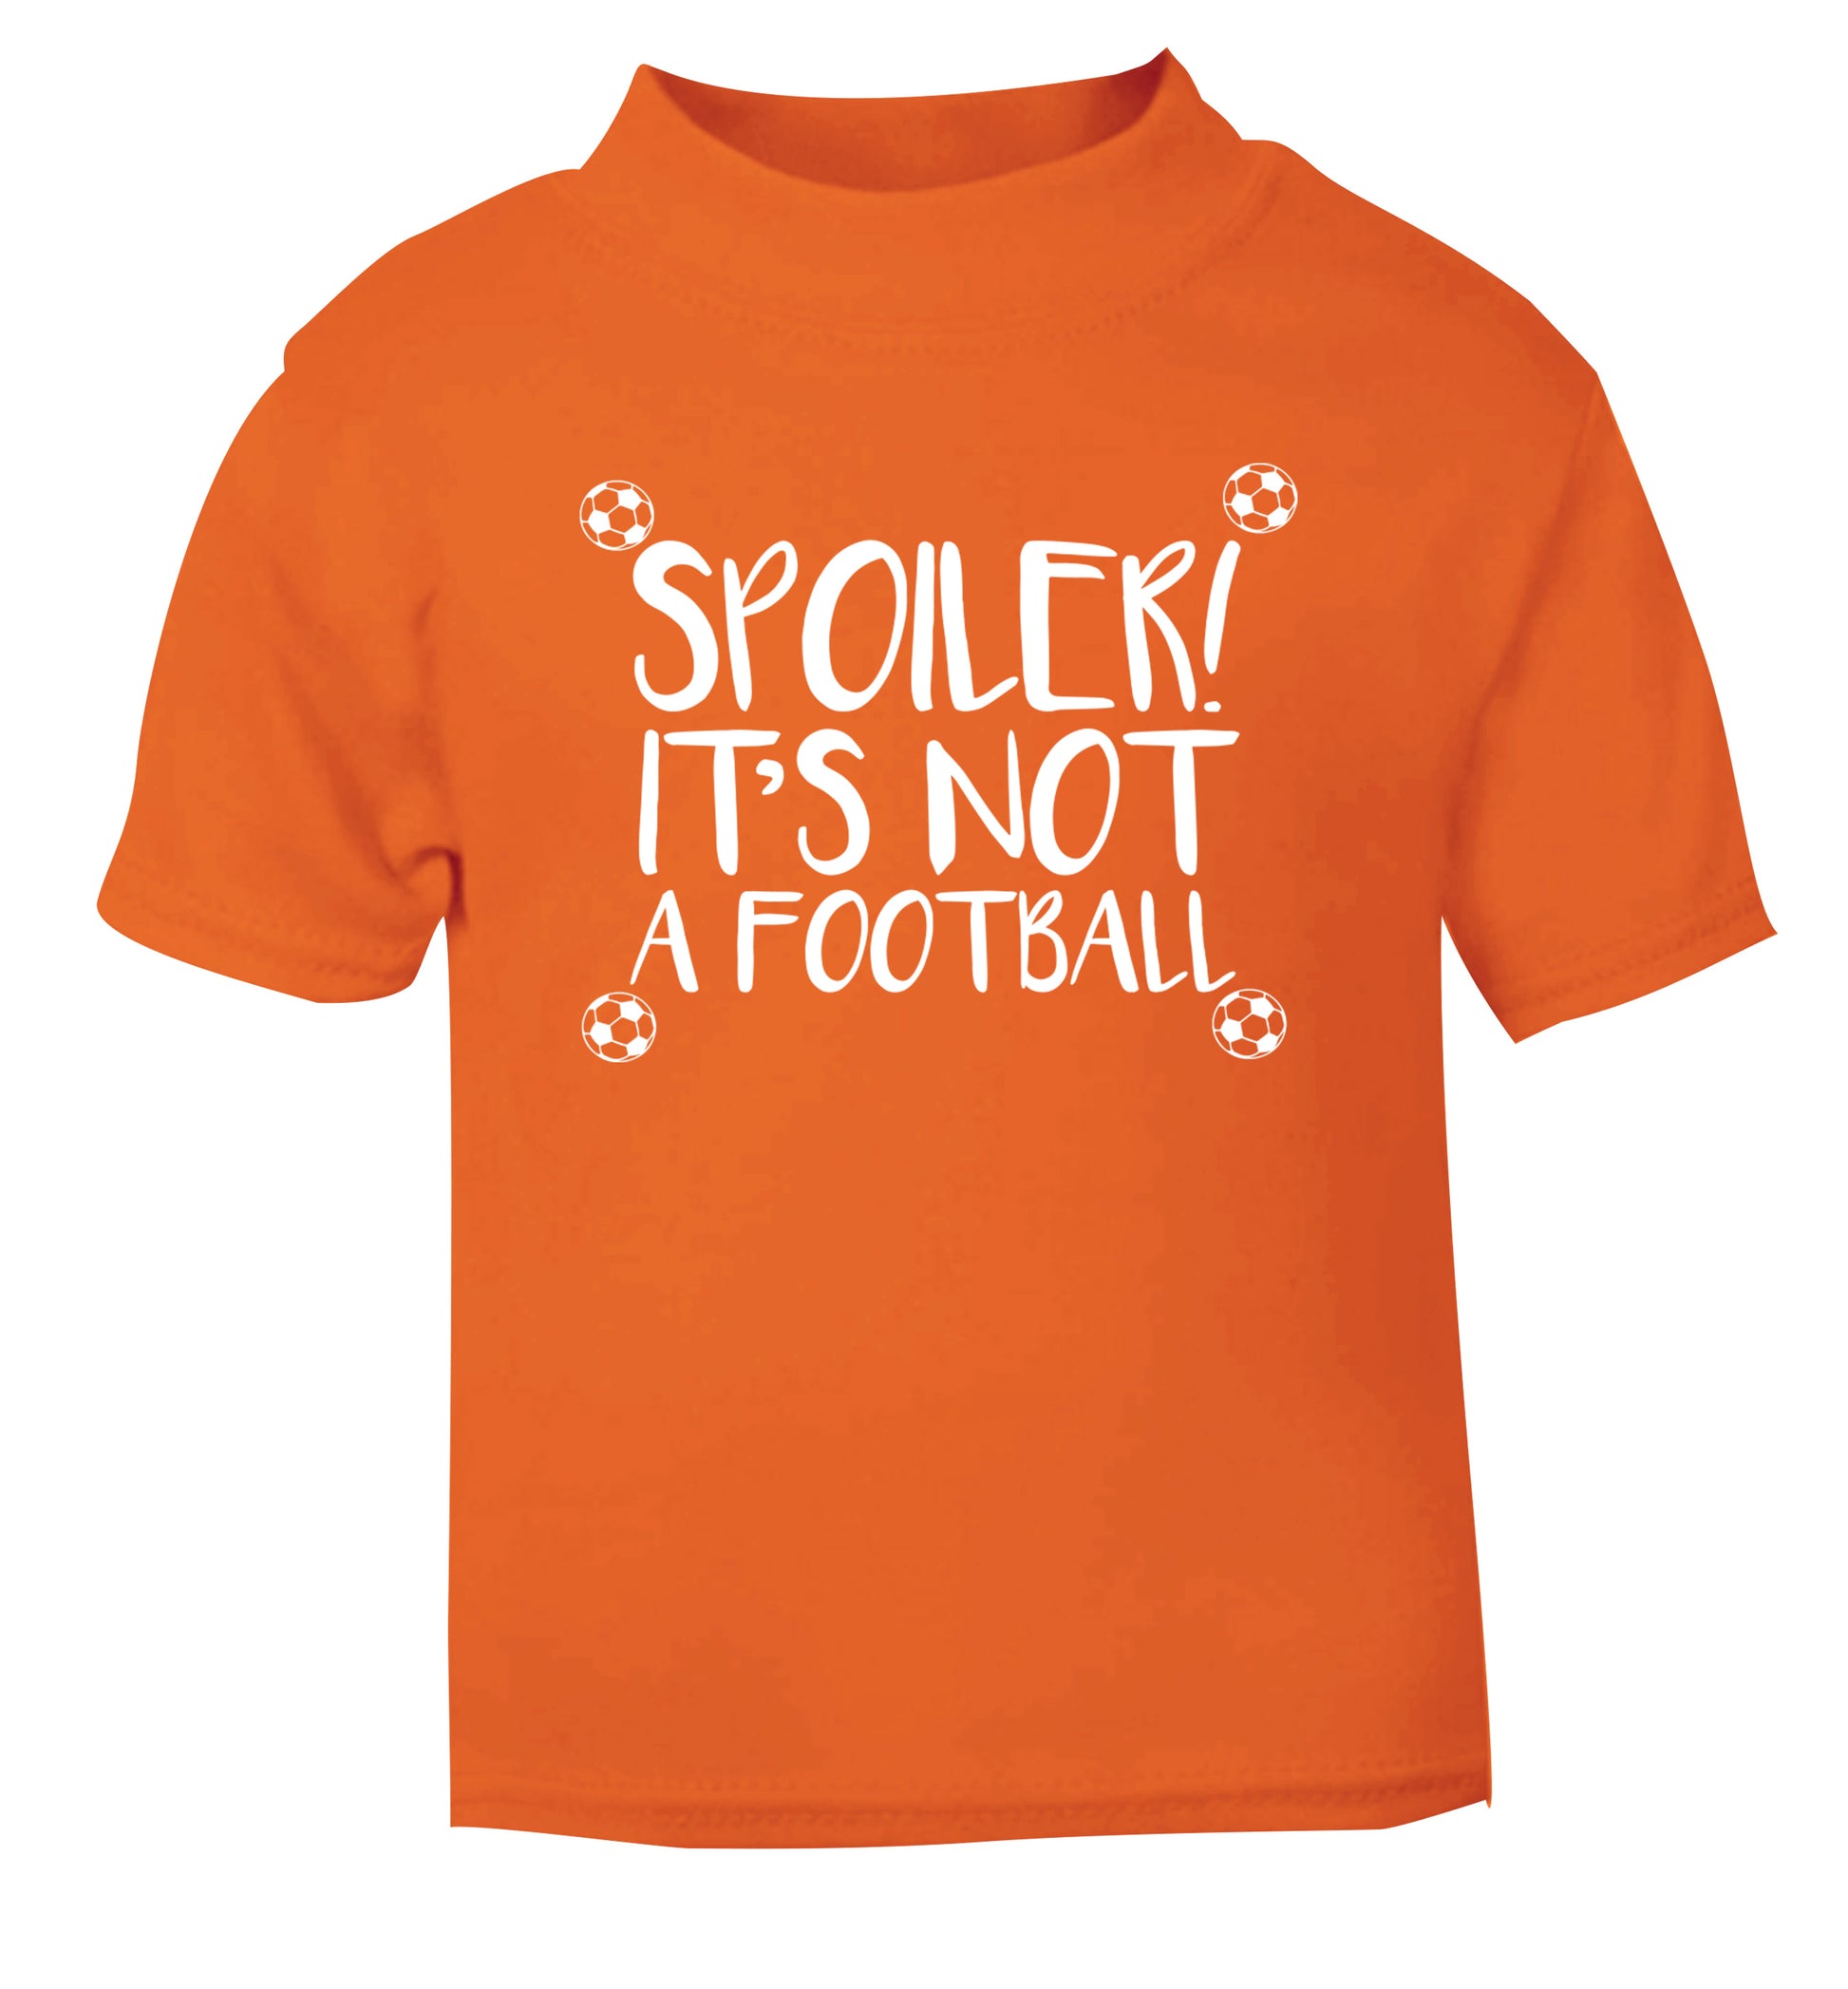 Spoiler it's not a football orange Baby Toddler Tshirt 2 Years